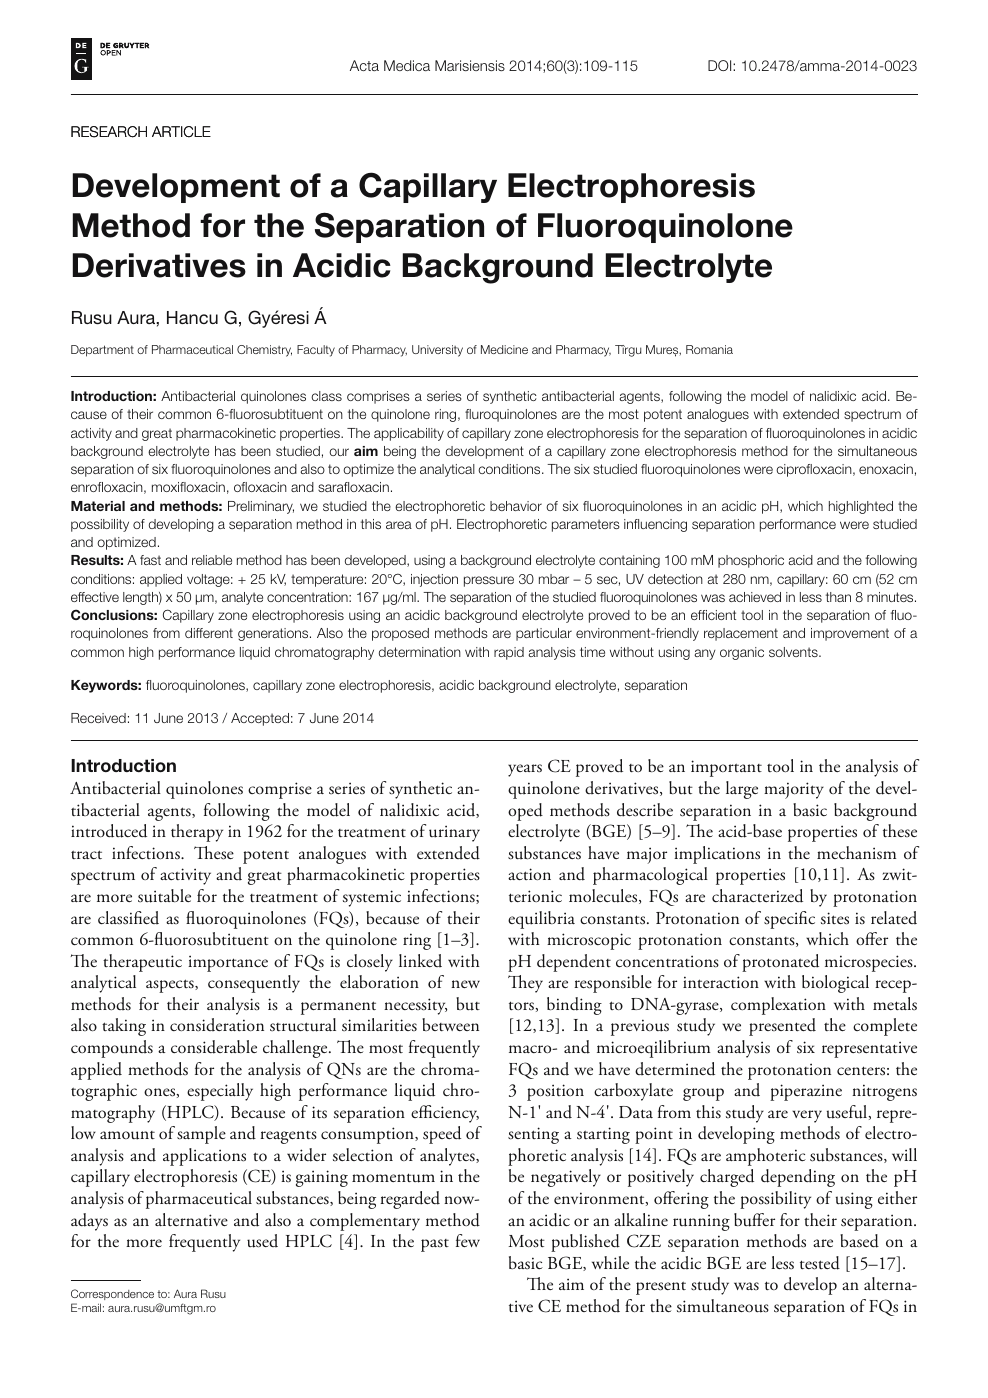 Development Of A Capillary Electrophoresis Method For The Separation Of Fluoroquinolone Derivatives In Acidic Background Electrolyte Topic Of Research Paper In Chemical Sciences Download Scholarly Article Pdf And Read For Free